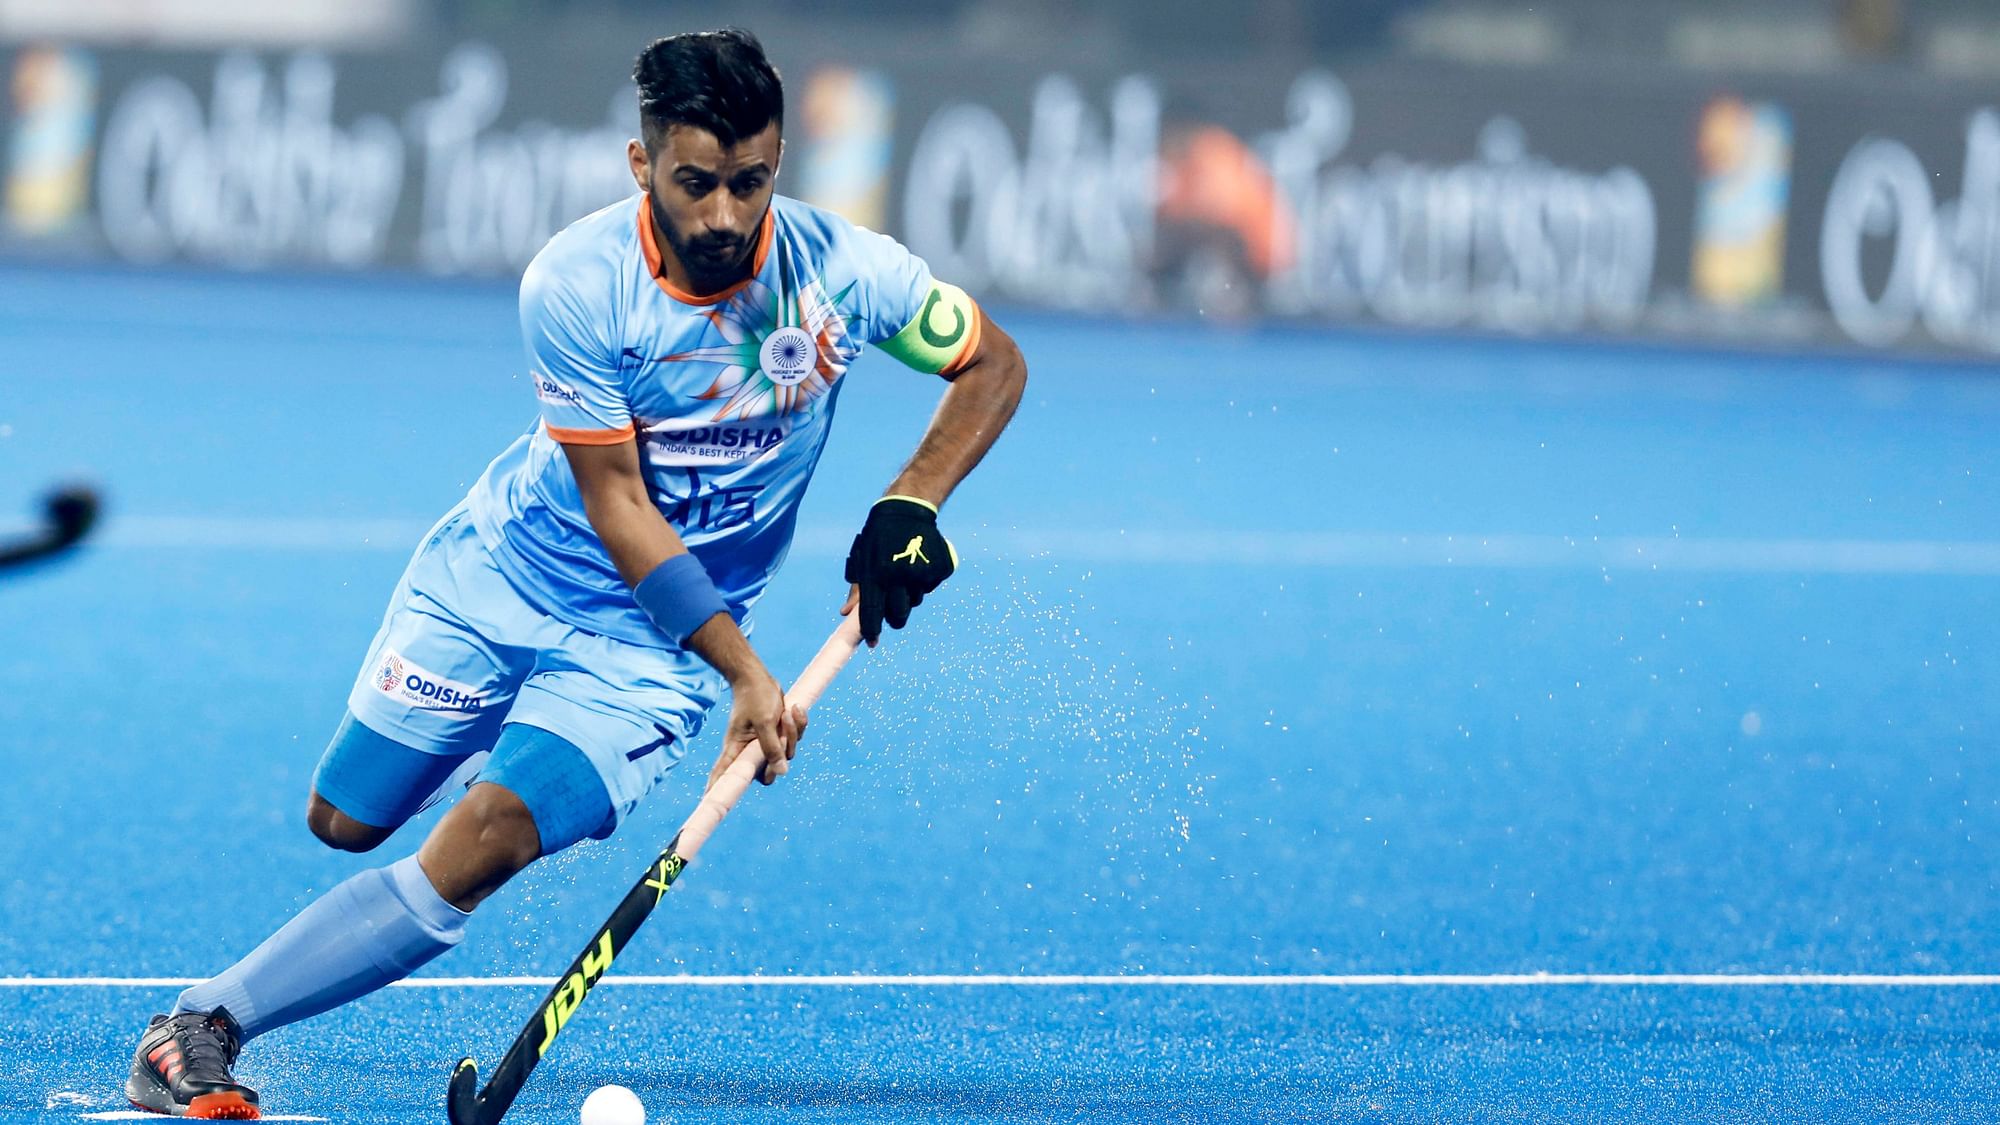 All six Indian men’s hockey team players, who have tested positive for coronavirus, have been shifted to a hospital in Bengaluru.